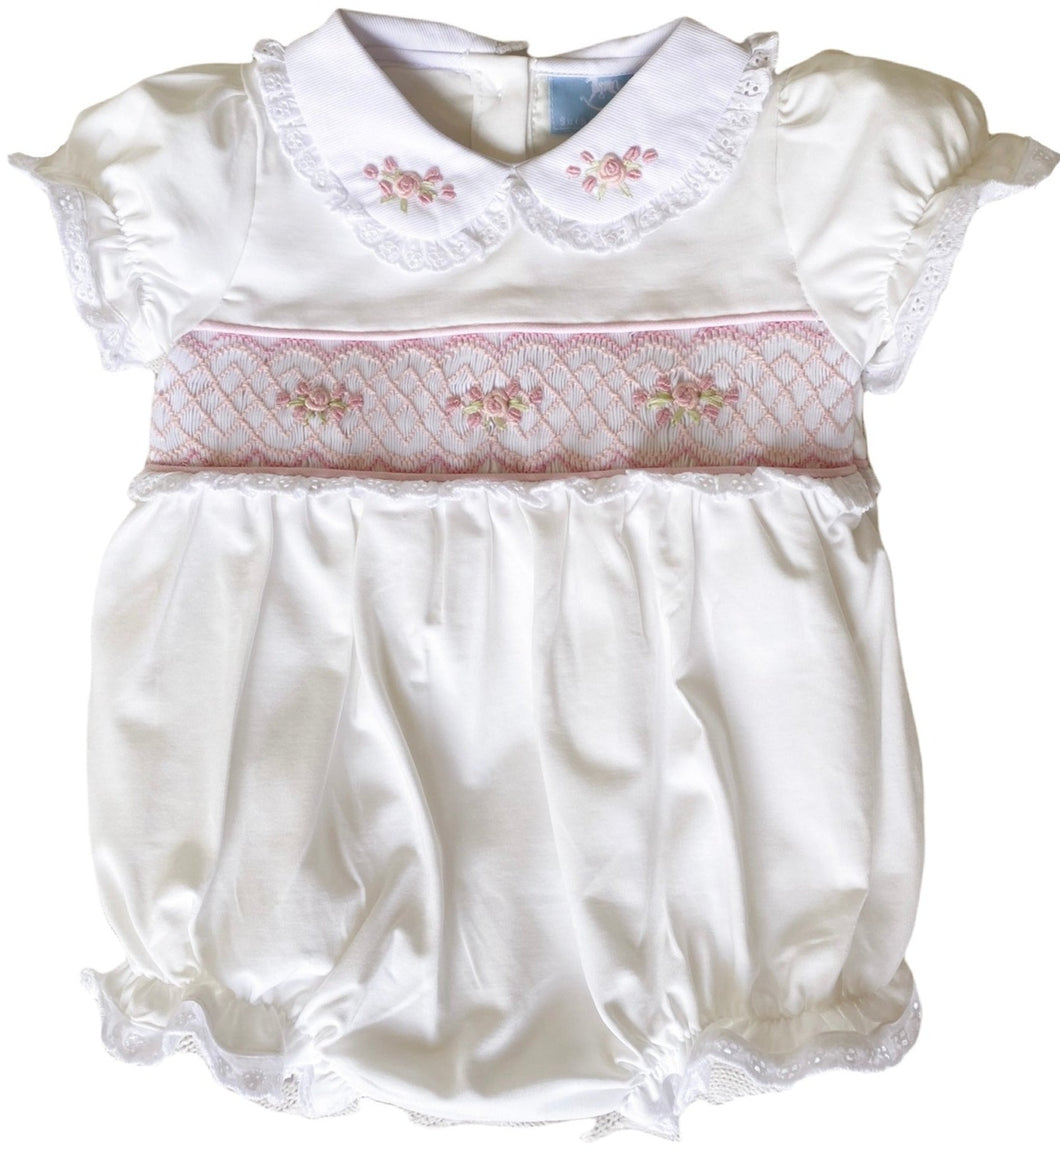 The Smocked Romper - Pink Floral Layette